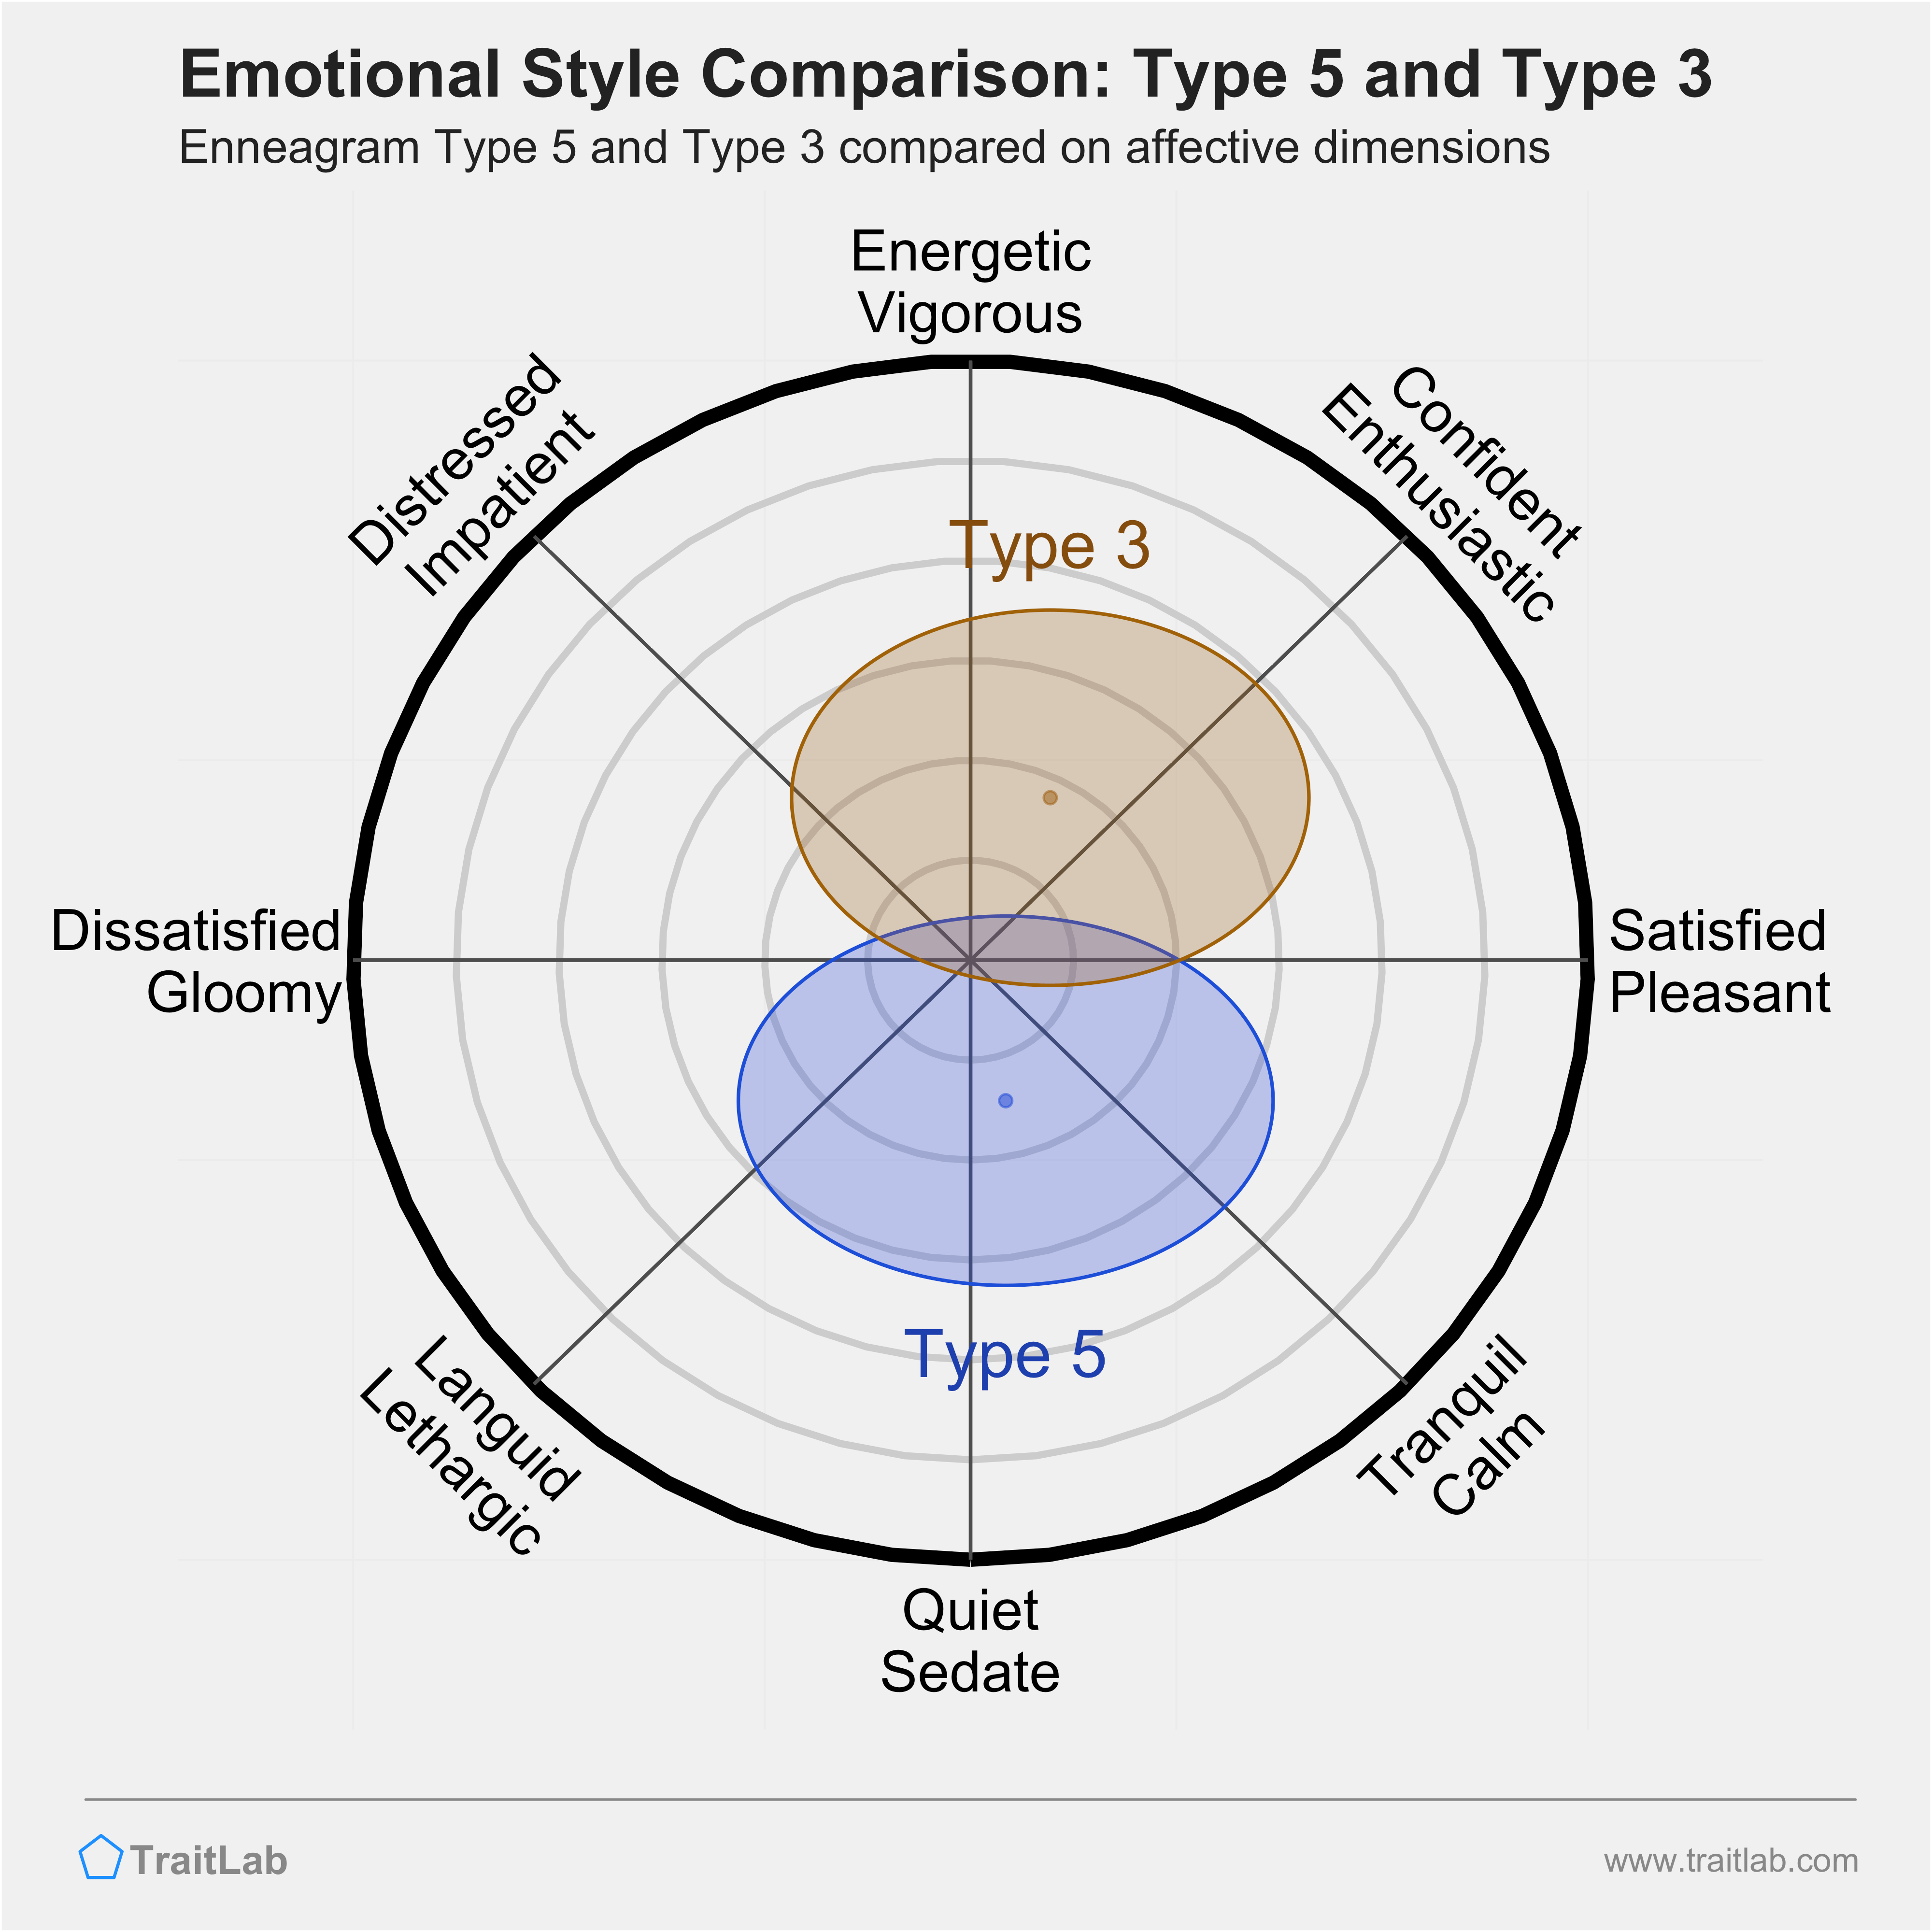 Type 5 and Type 3 comparison across emotional (affective) dimensions